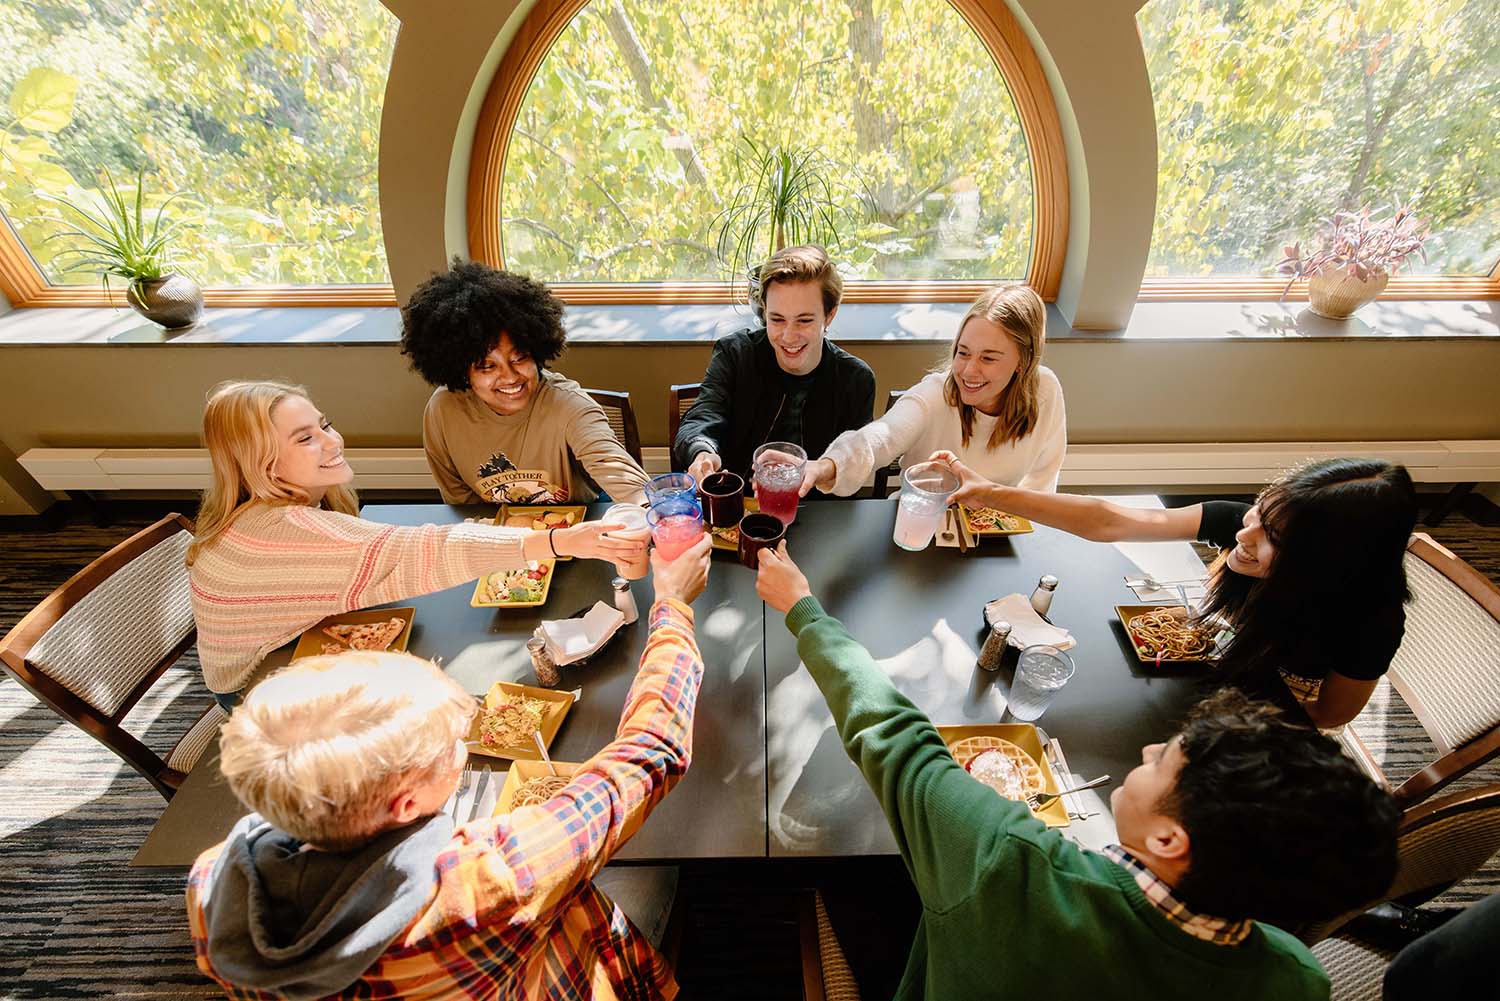 Students around a table in the Gerber Center dining hll